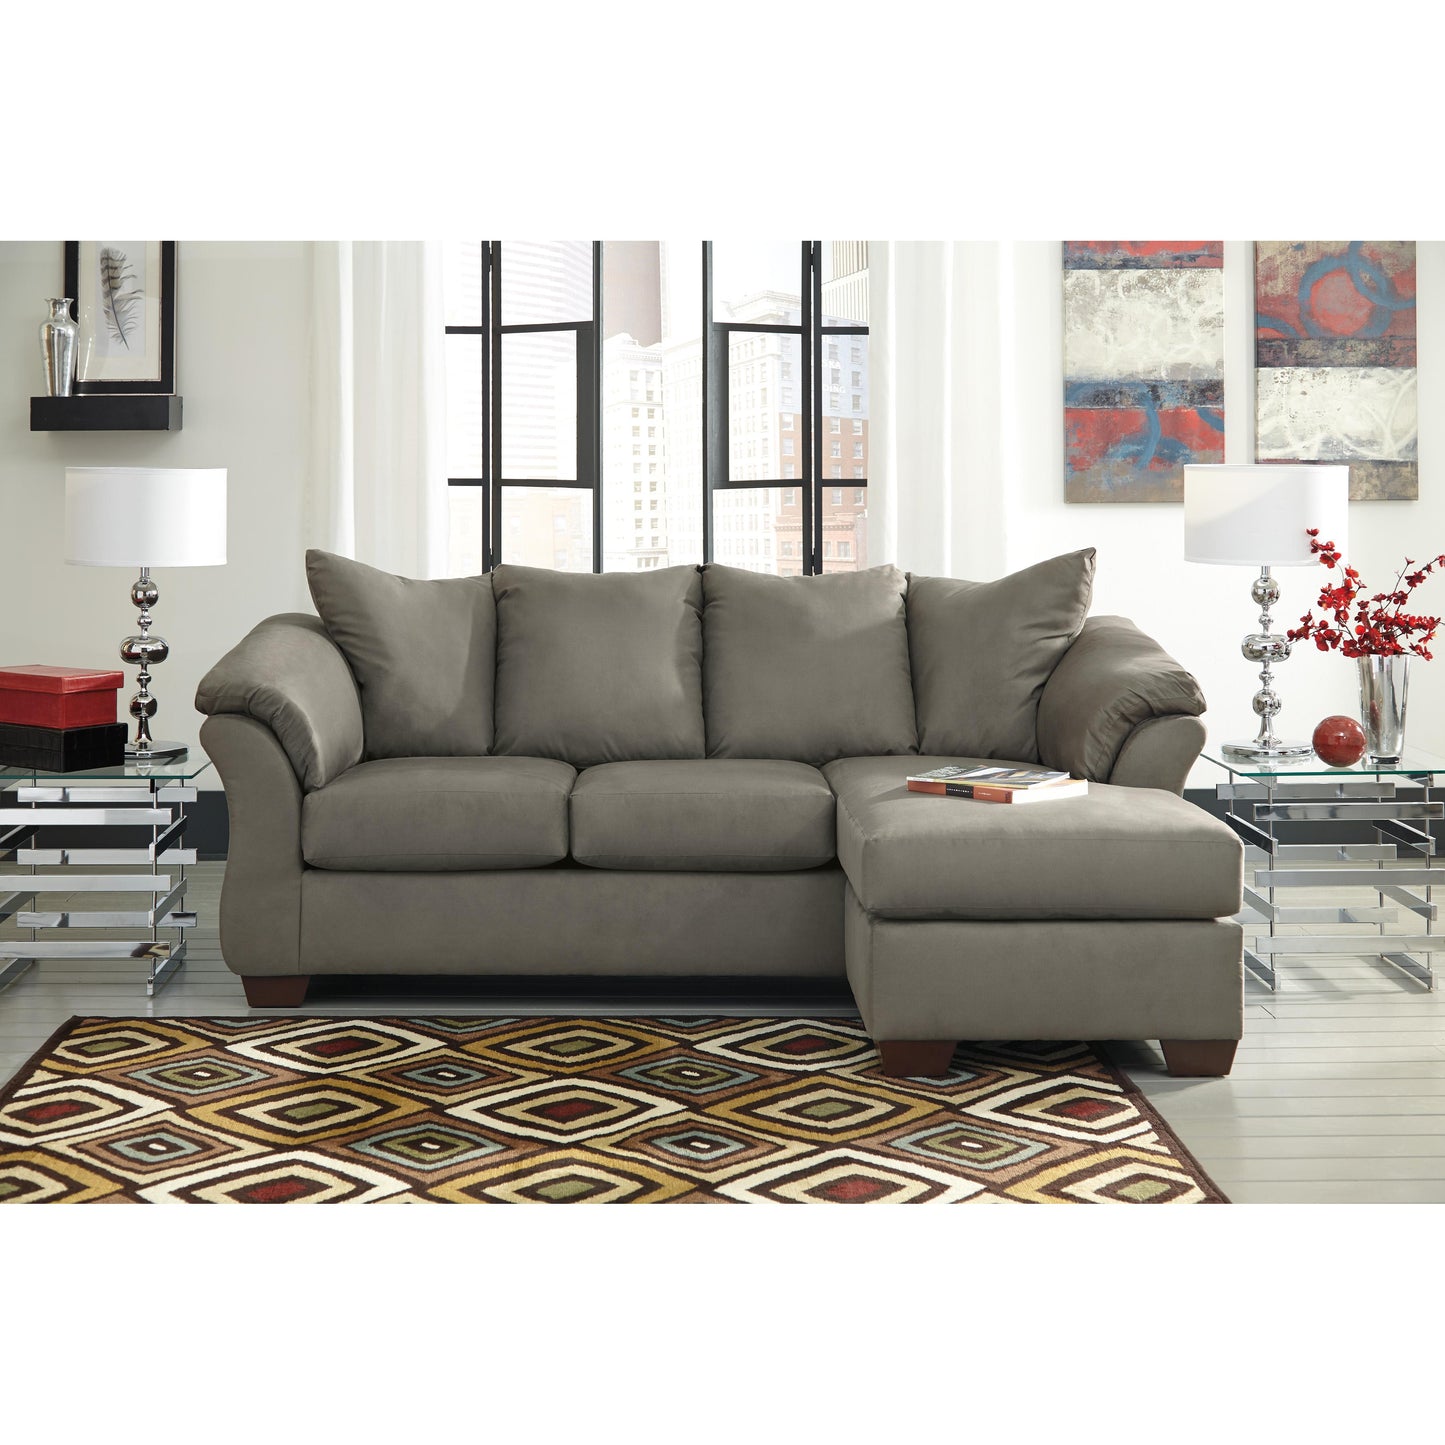 Signature Design by Ashley Darcy Fabric Sectional 7500518